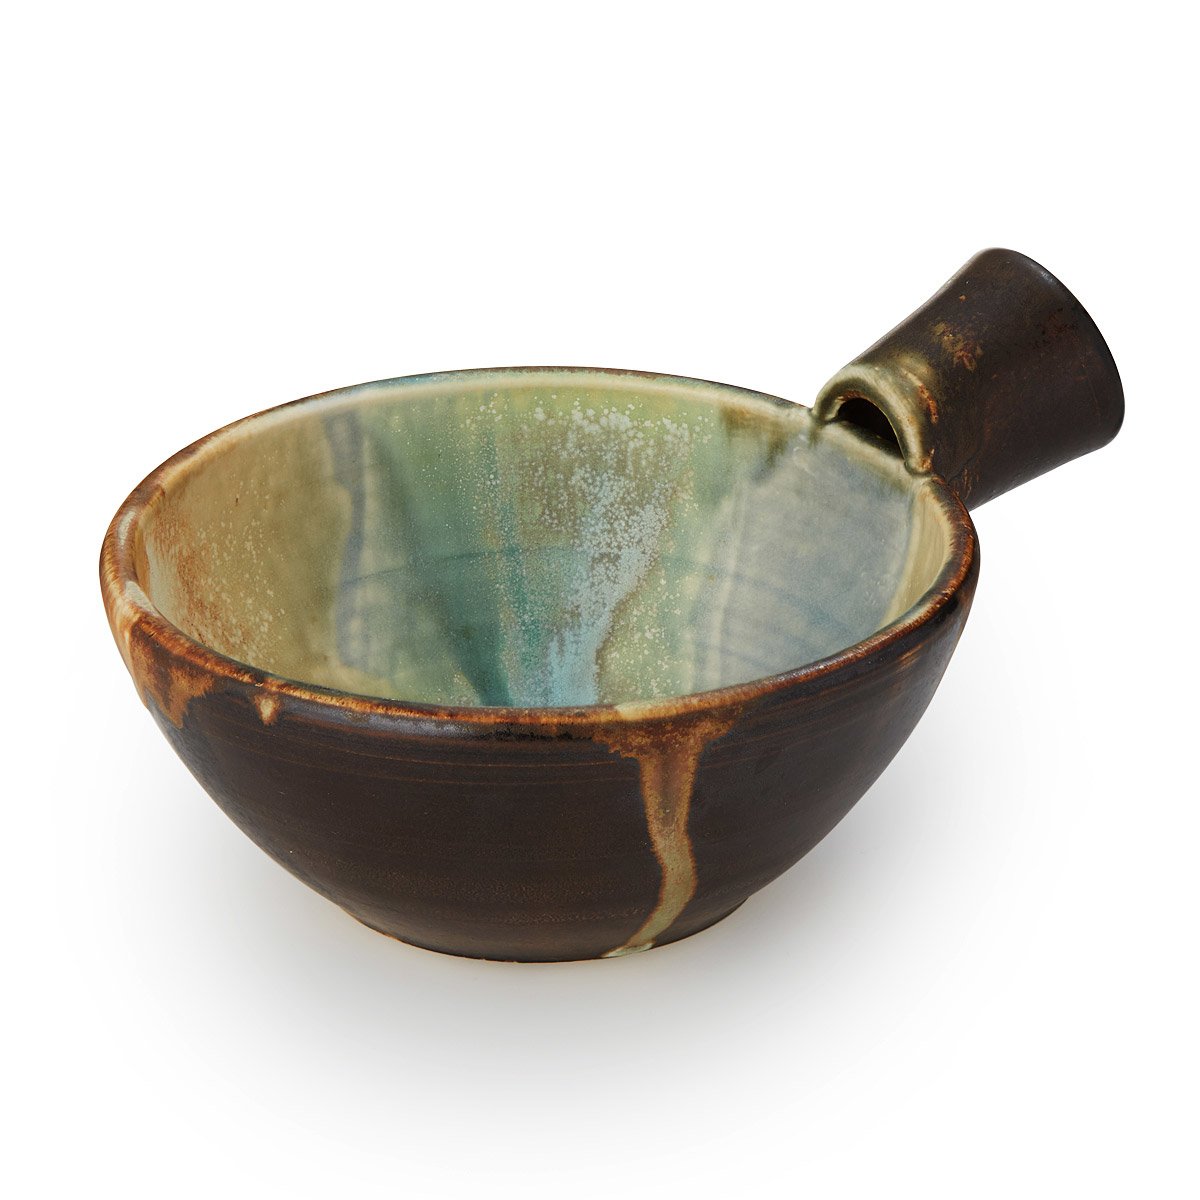 soup-bowl-with-handle-stoneware-bowl-soup-bowl-uncommongoods